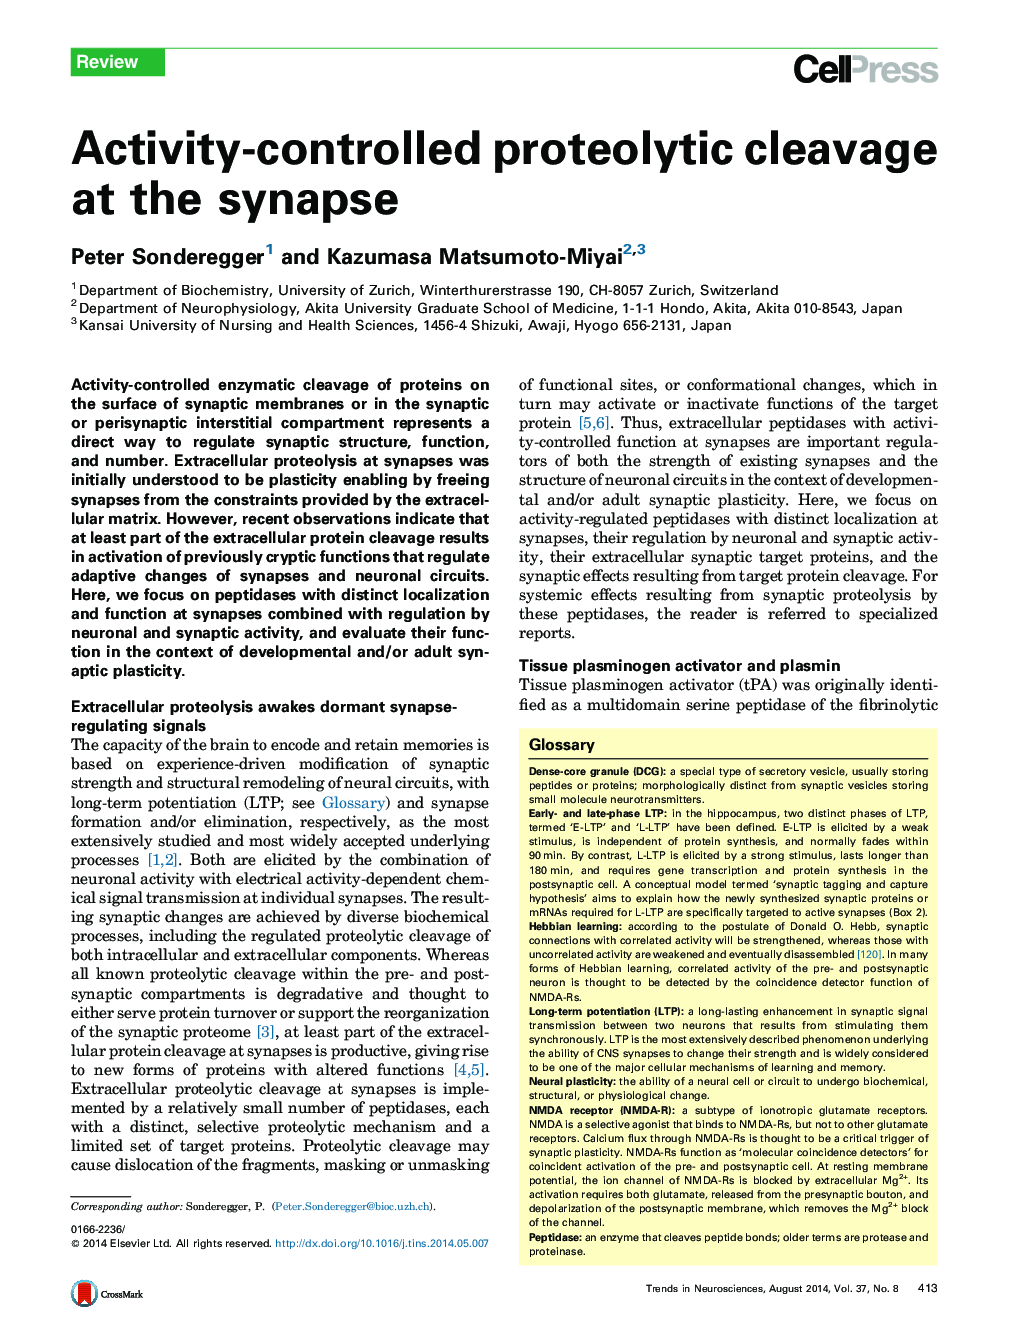 Activity-controlled proteolytic cleavage at the synapse